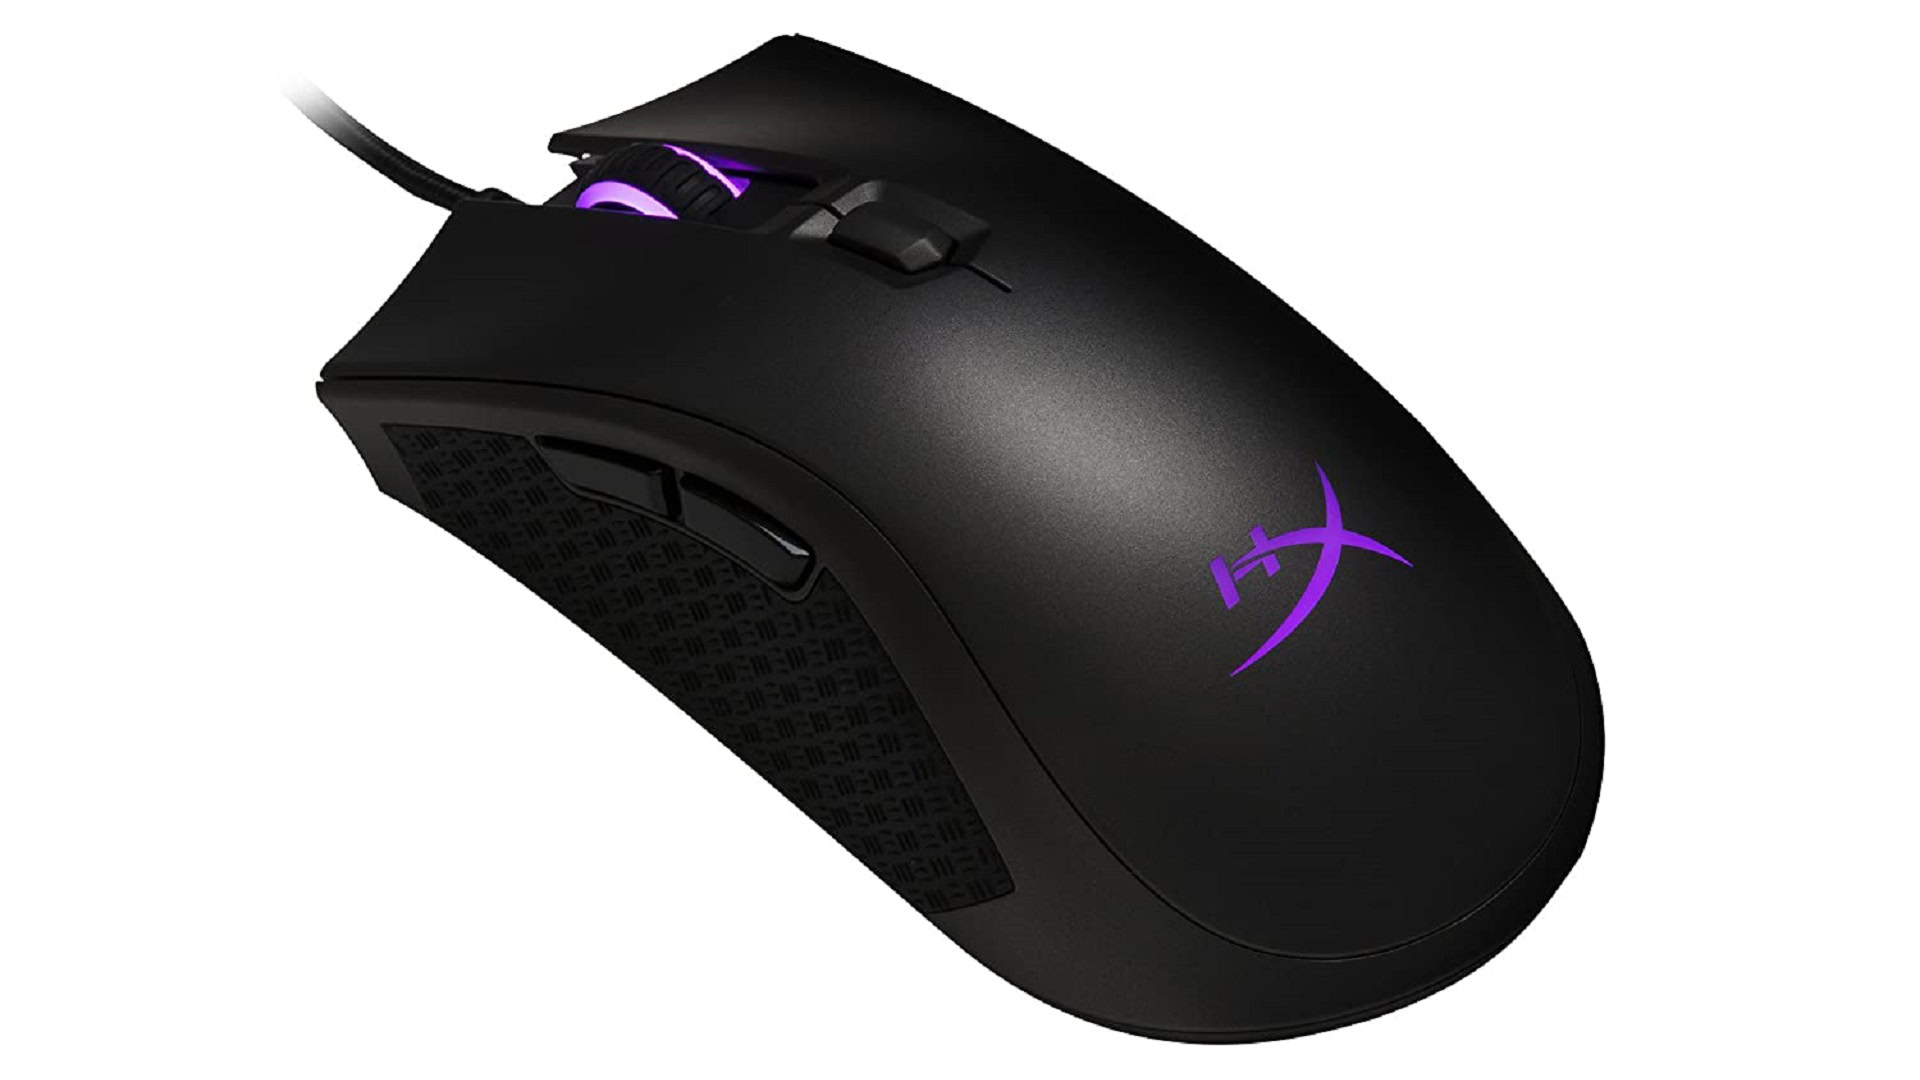 HyperX Pulsefire FPS Pro mouse on a white background